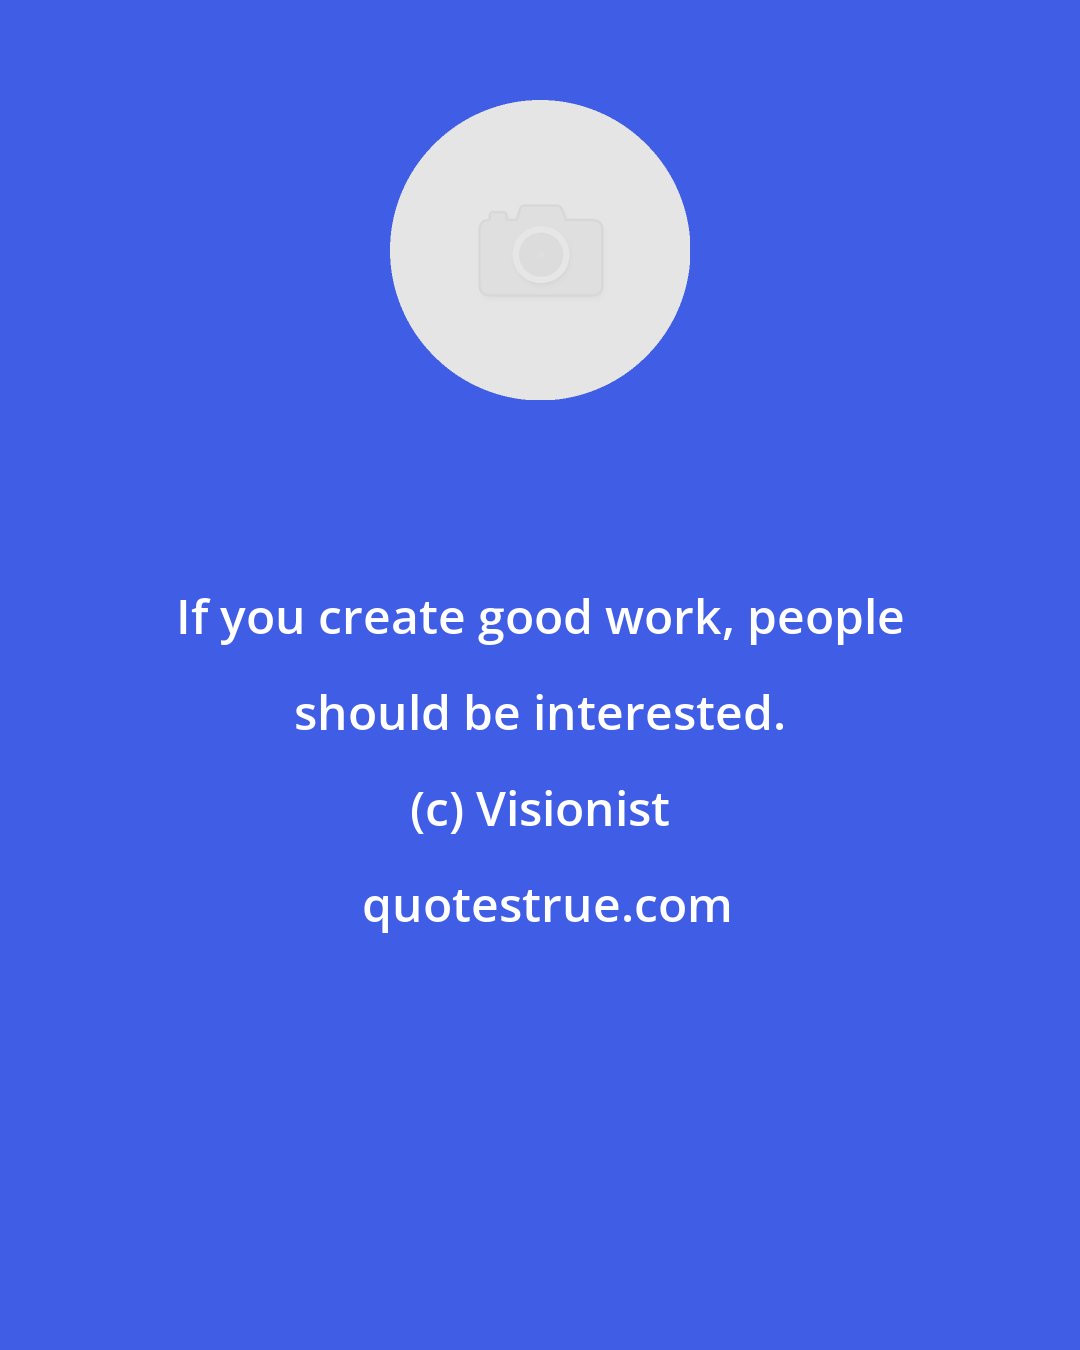 Visionist: If you create good work, people should be interested.